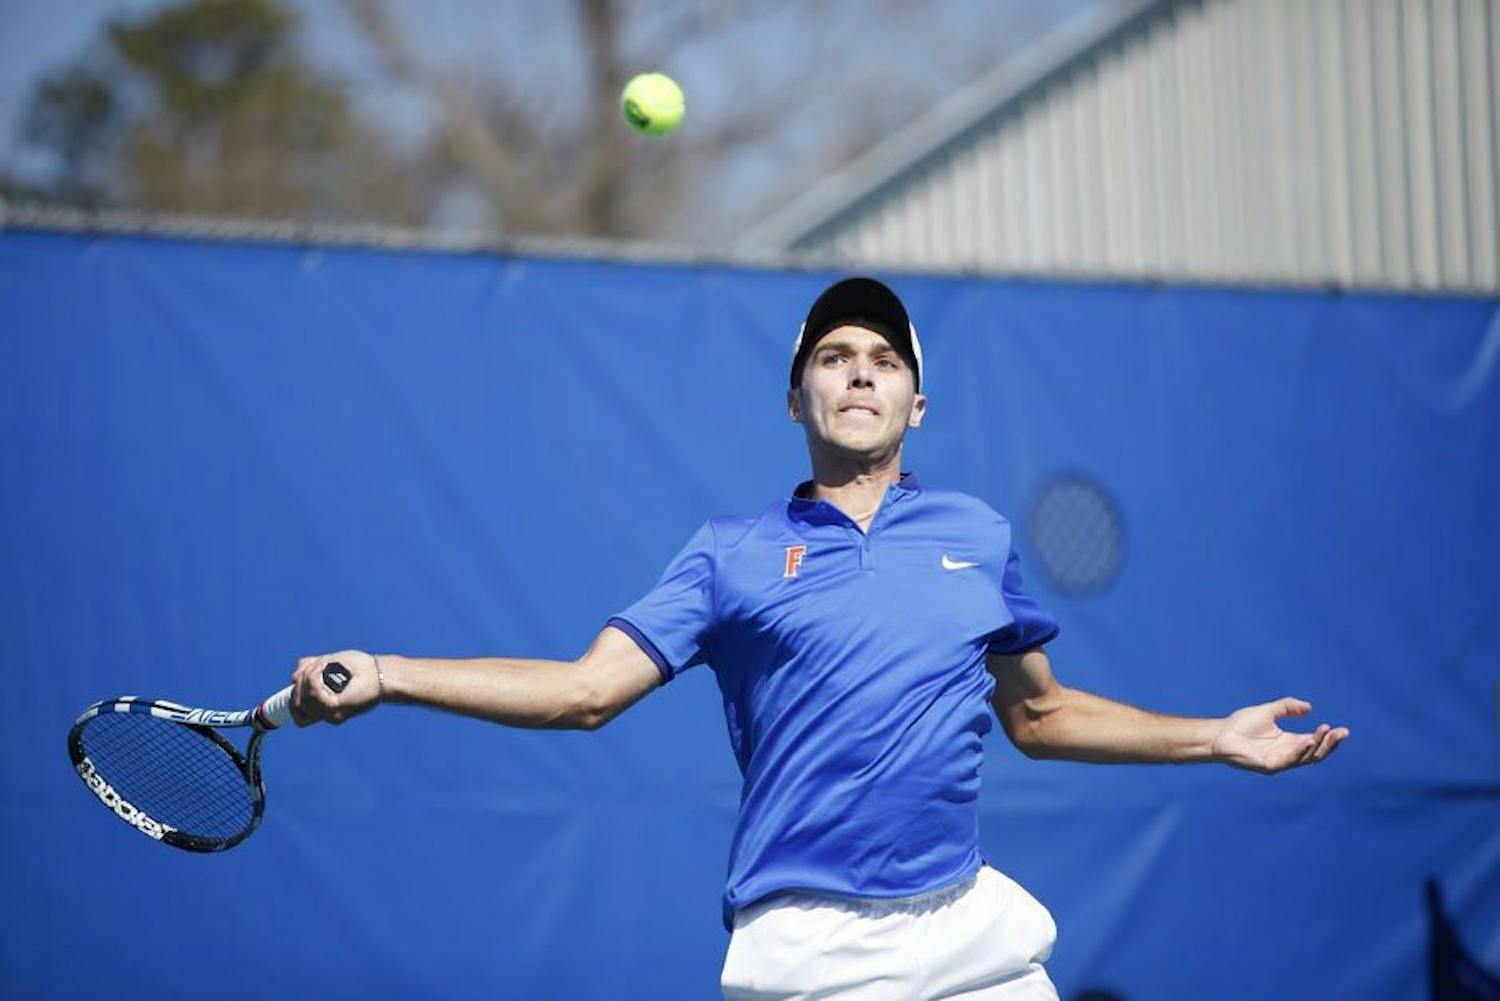 Senior Chase Perez-Blanco played the last regular-season match of his Gators career in UF's 7-0 victory over Alabama on Friday.&nbsp;“I wouldn’t change a thing,” he said. “It’s just been the best four years.”